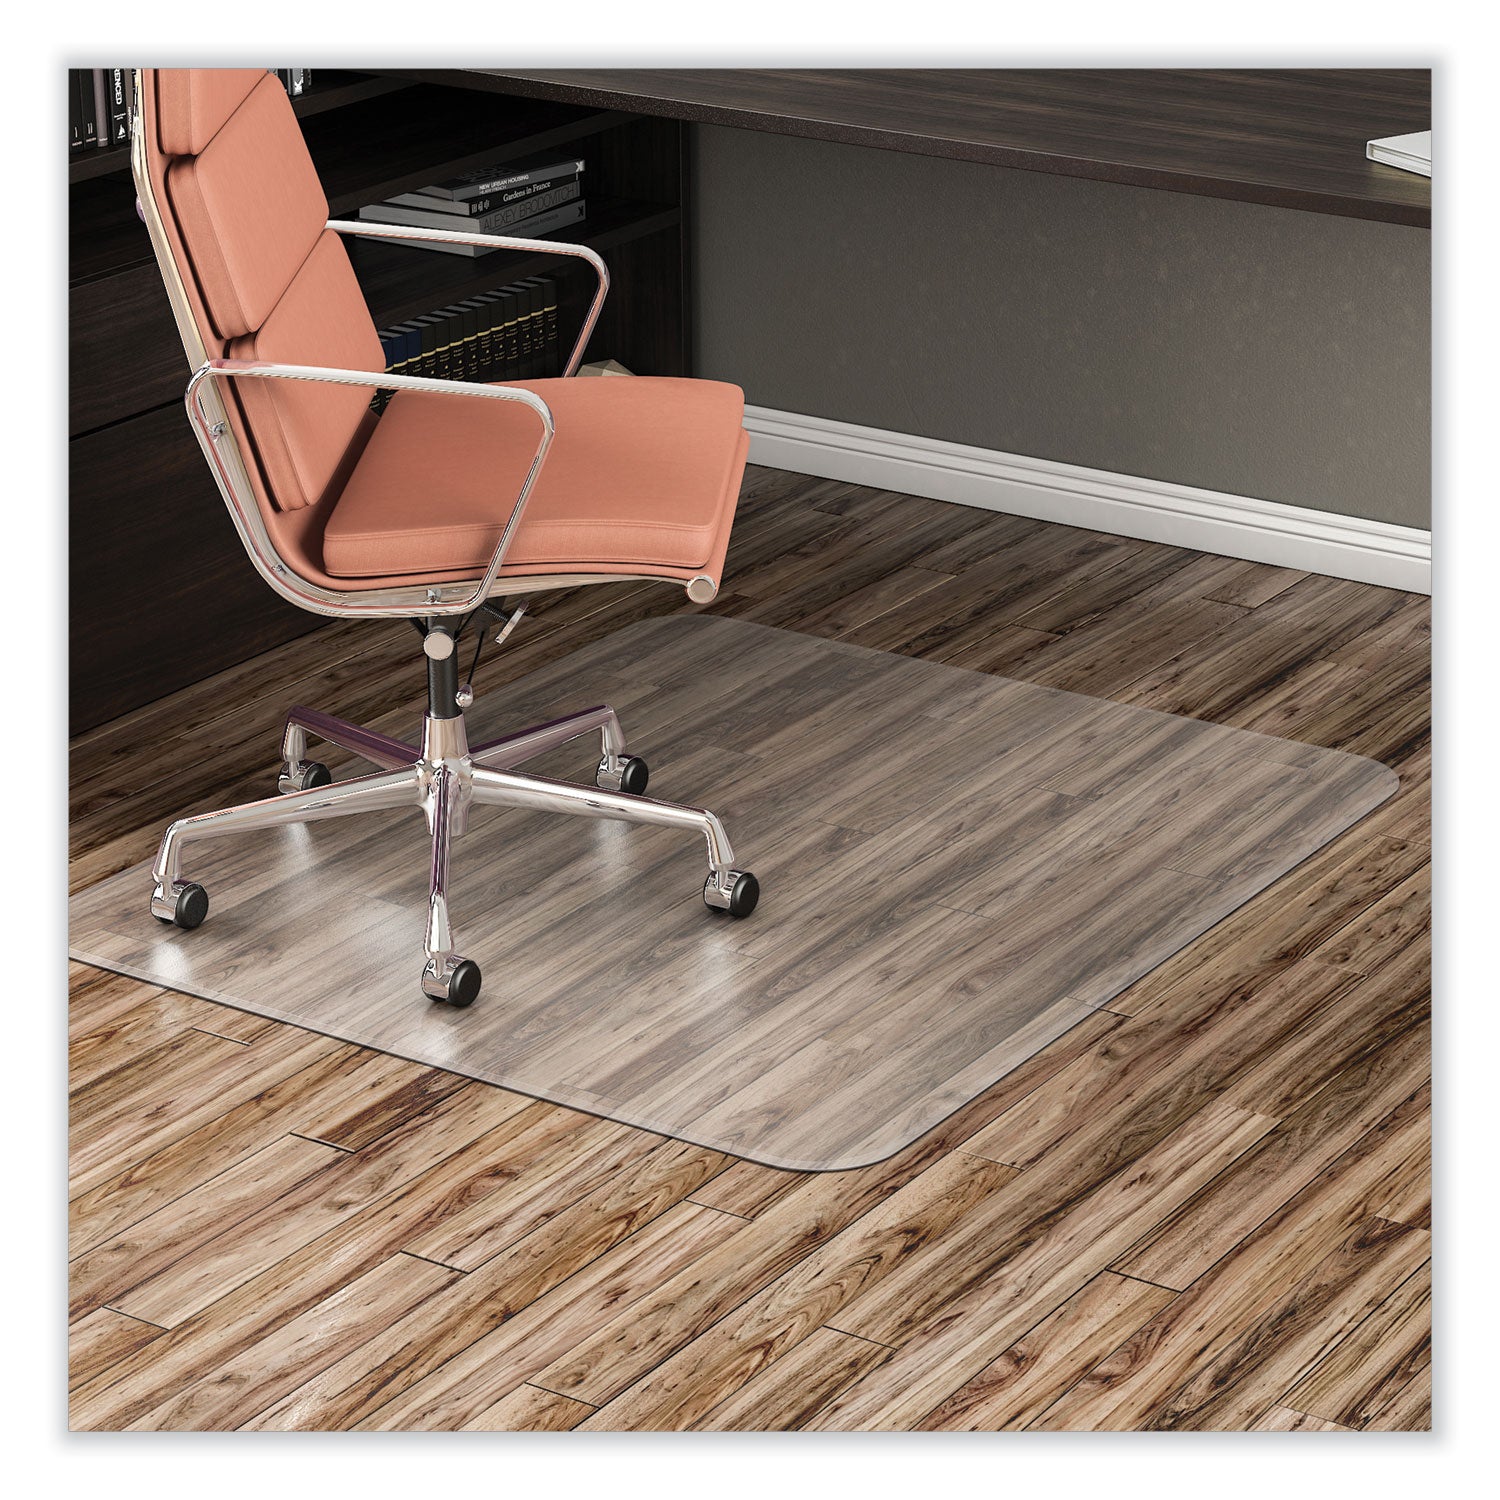 economat-all-day-use-chair-mat-for-hard-floors-flat-packed-36-x-48-clear_defcm2e142 - 2